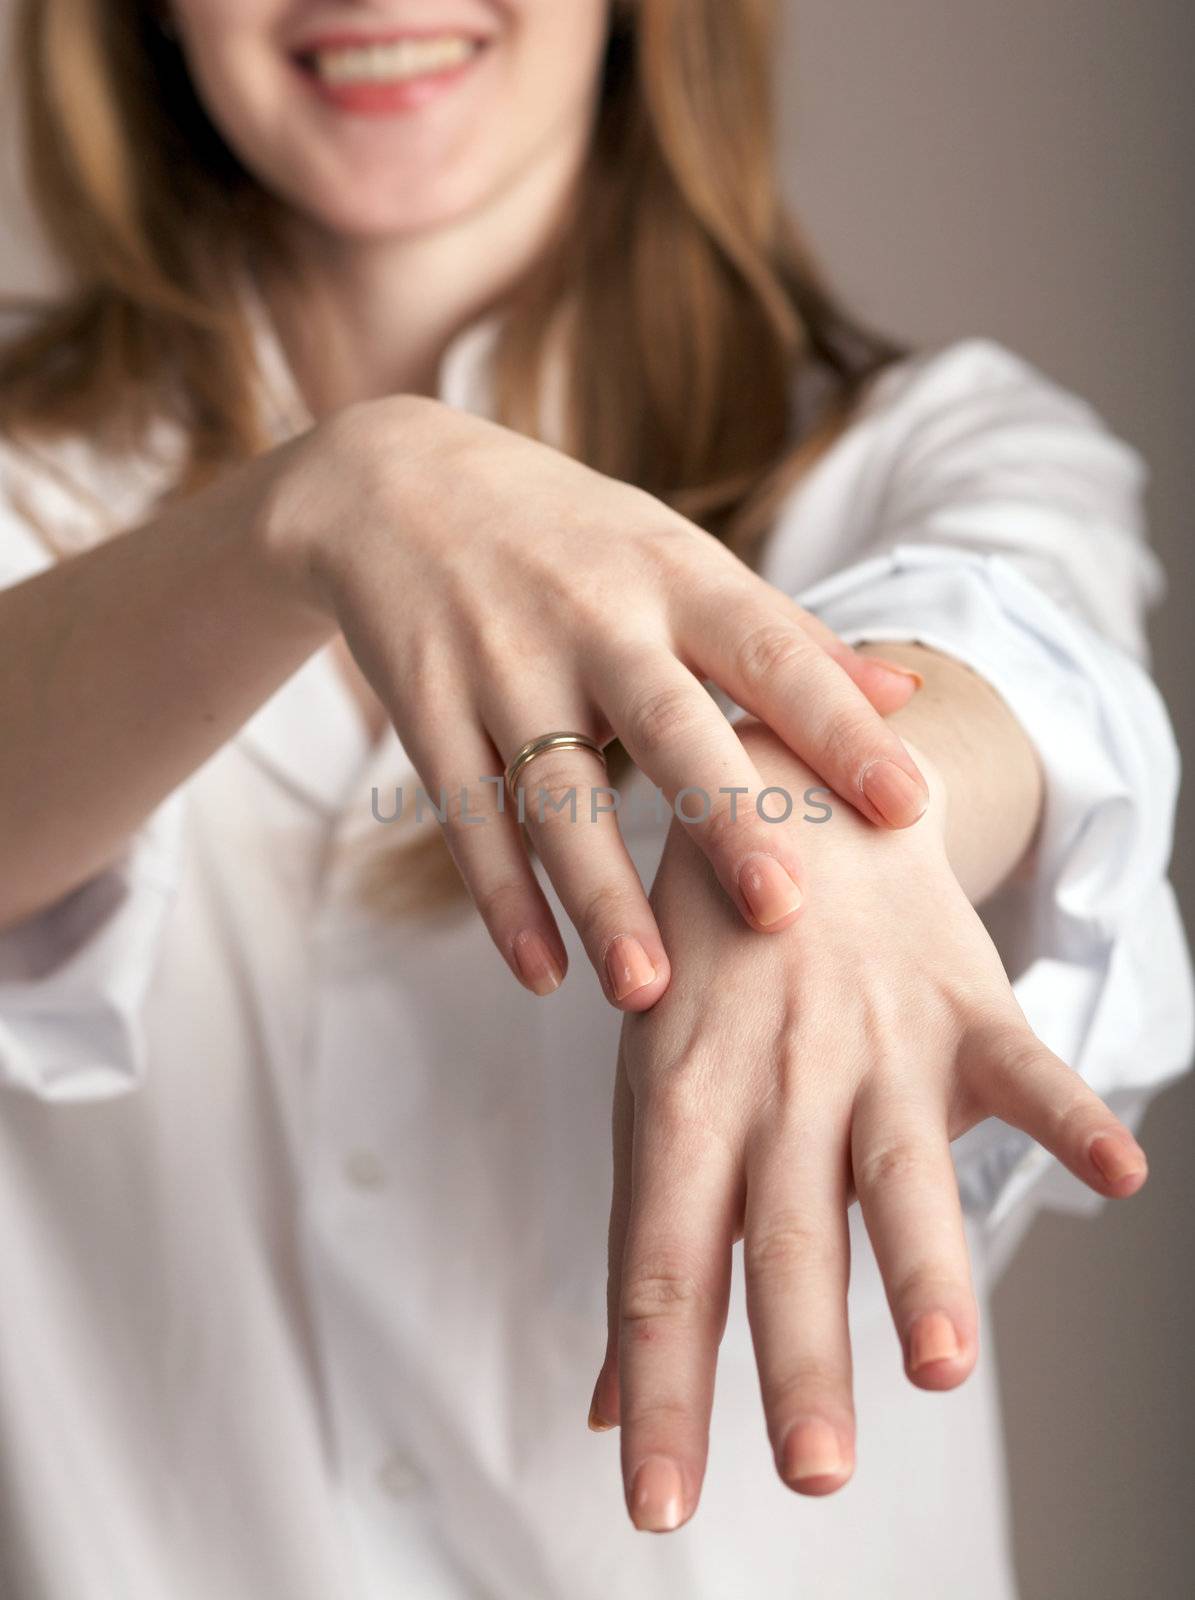 A woman in white shirt showing her hands